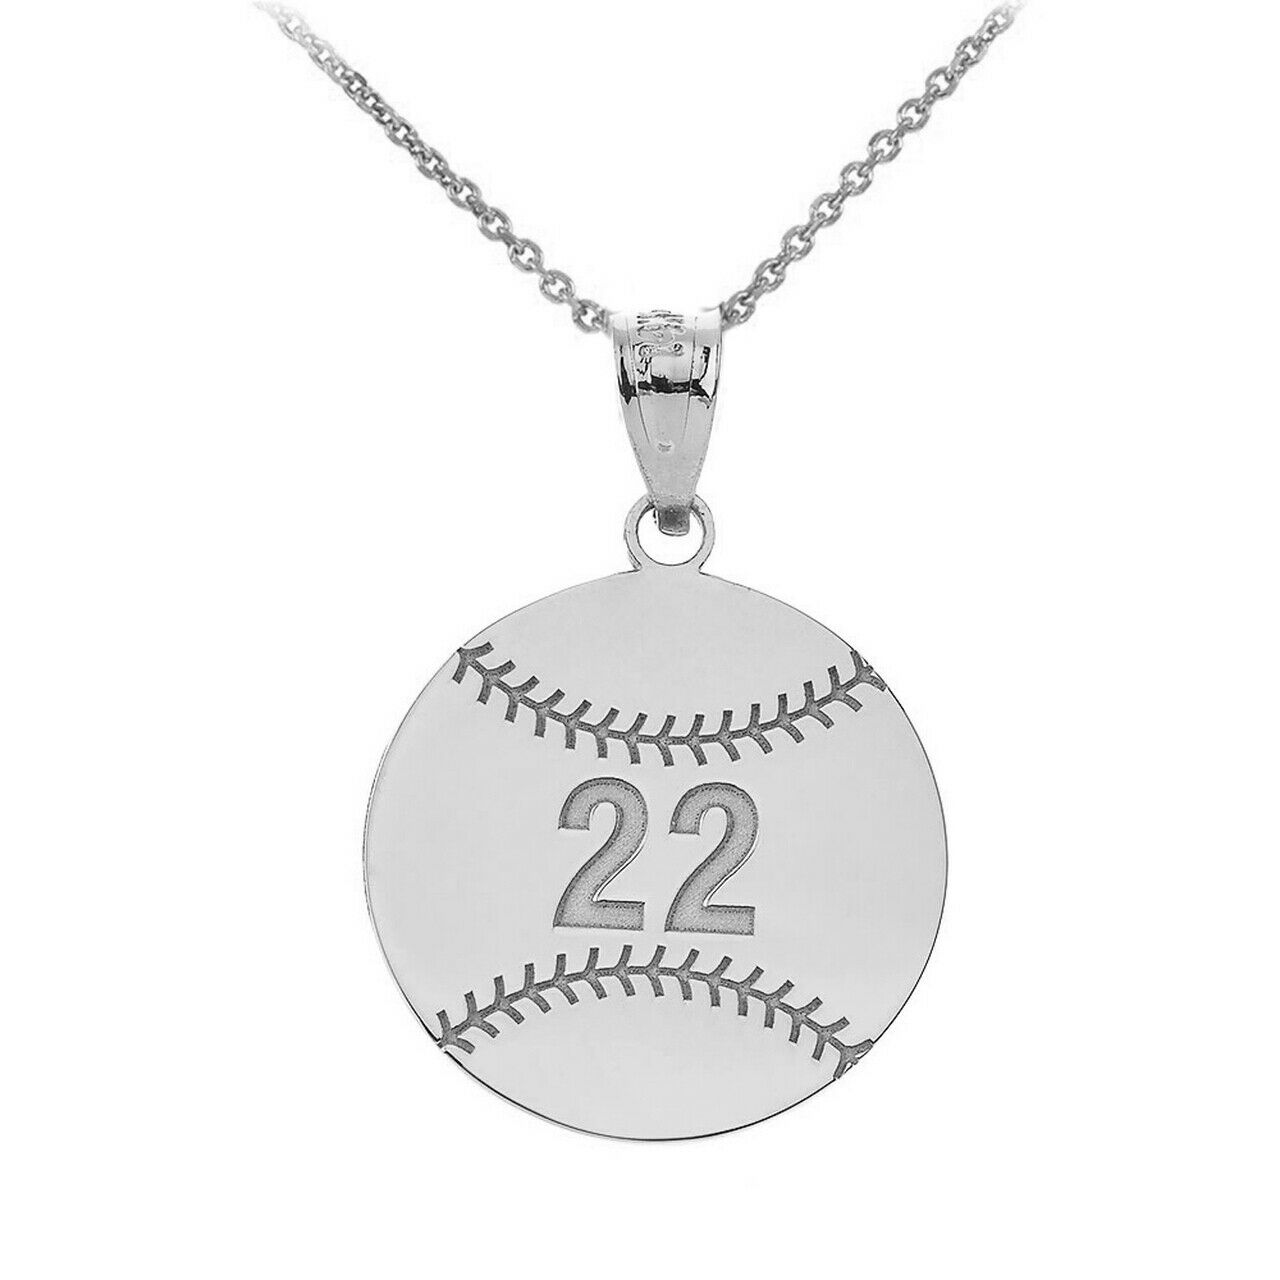 Personalized Engrave Name Number Baseball Softball Sports Pendant Necklace